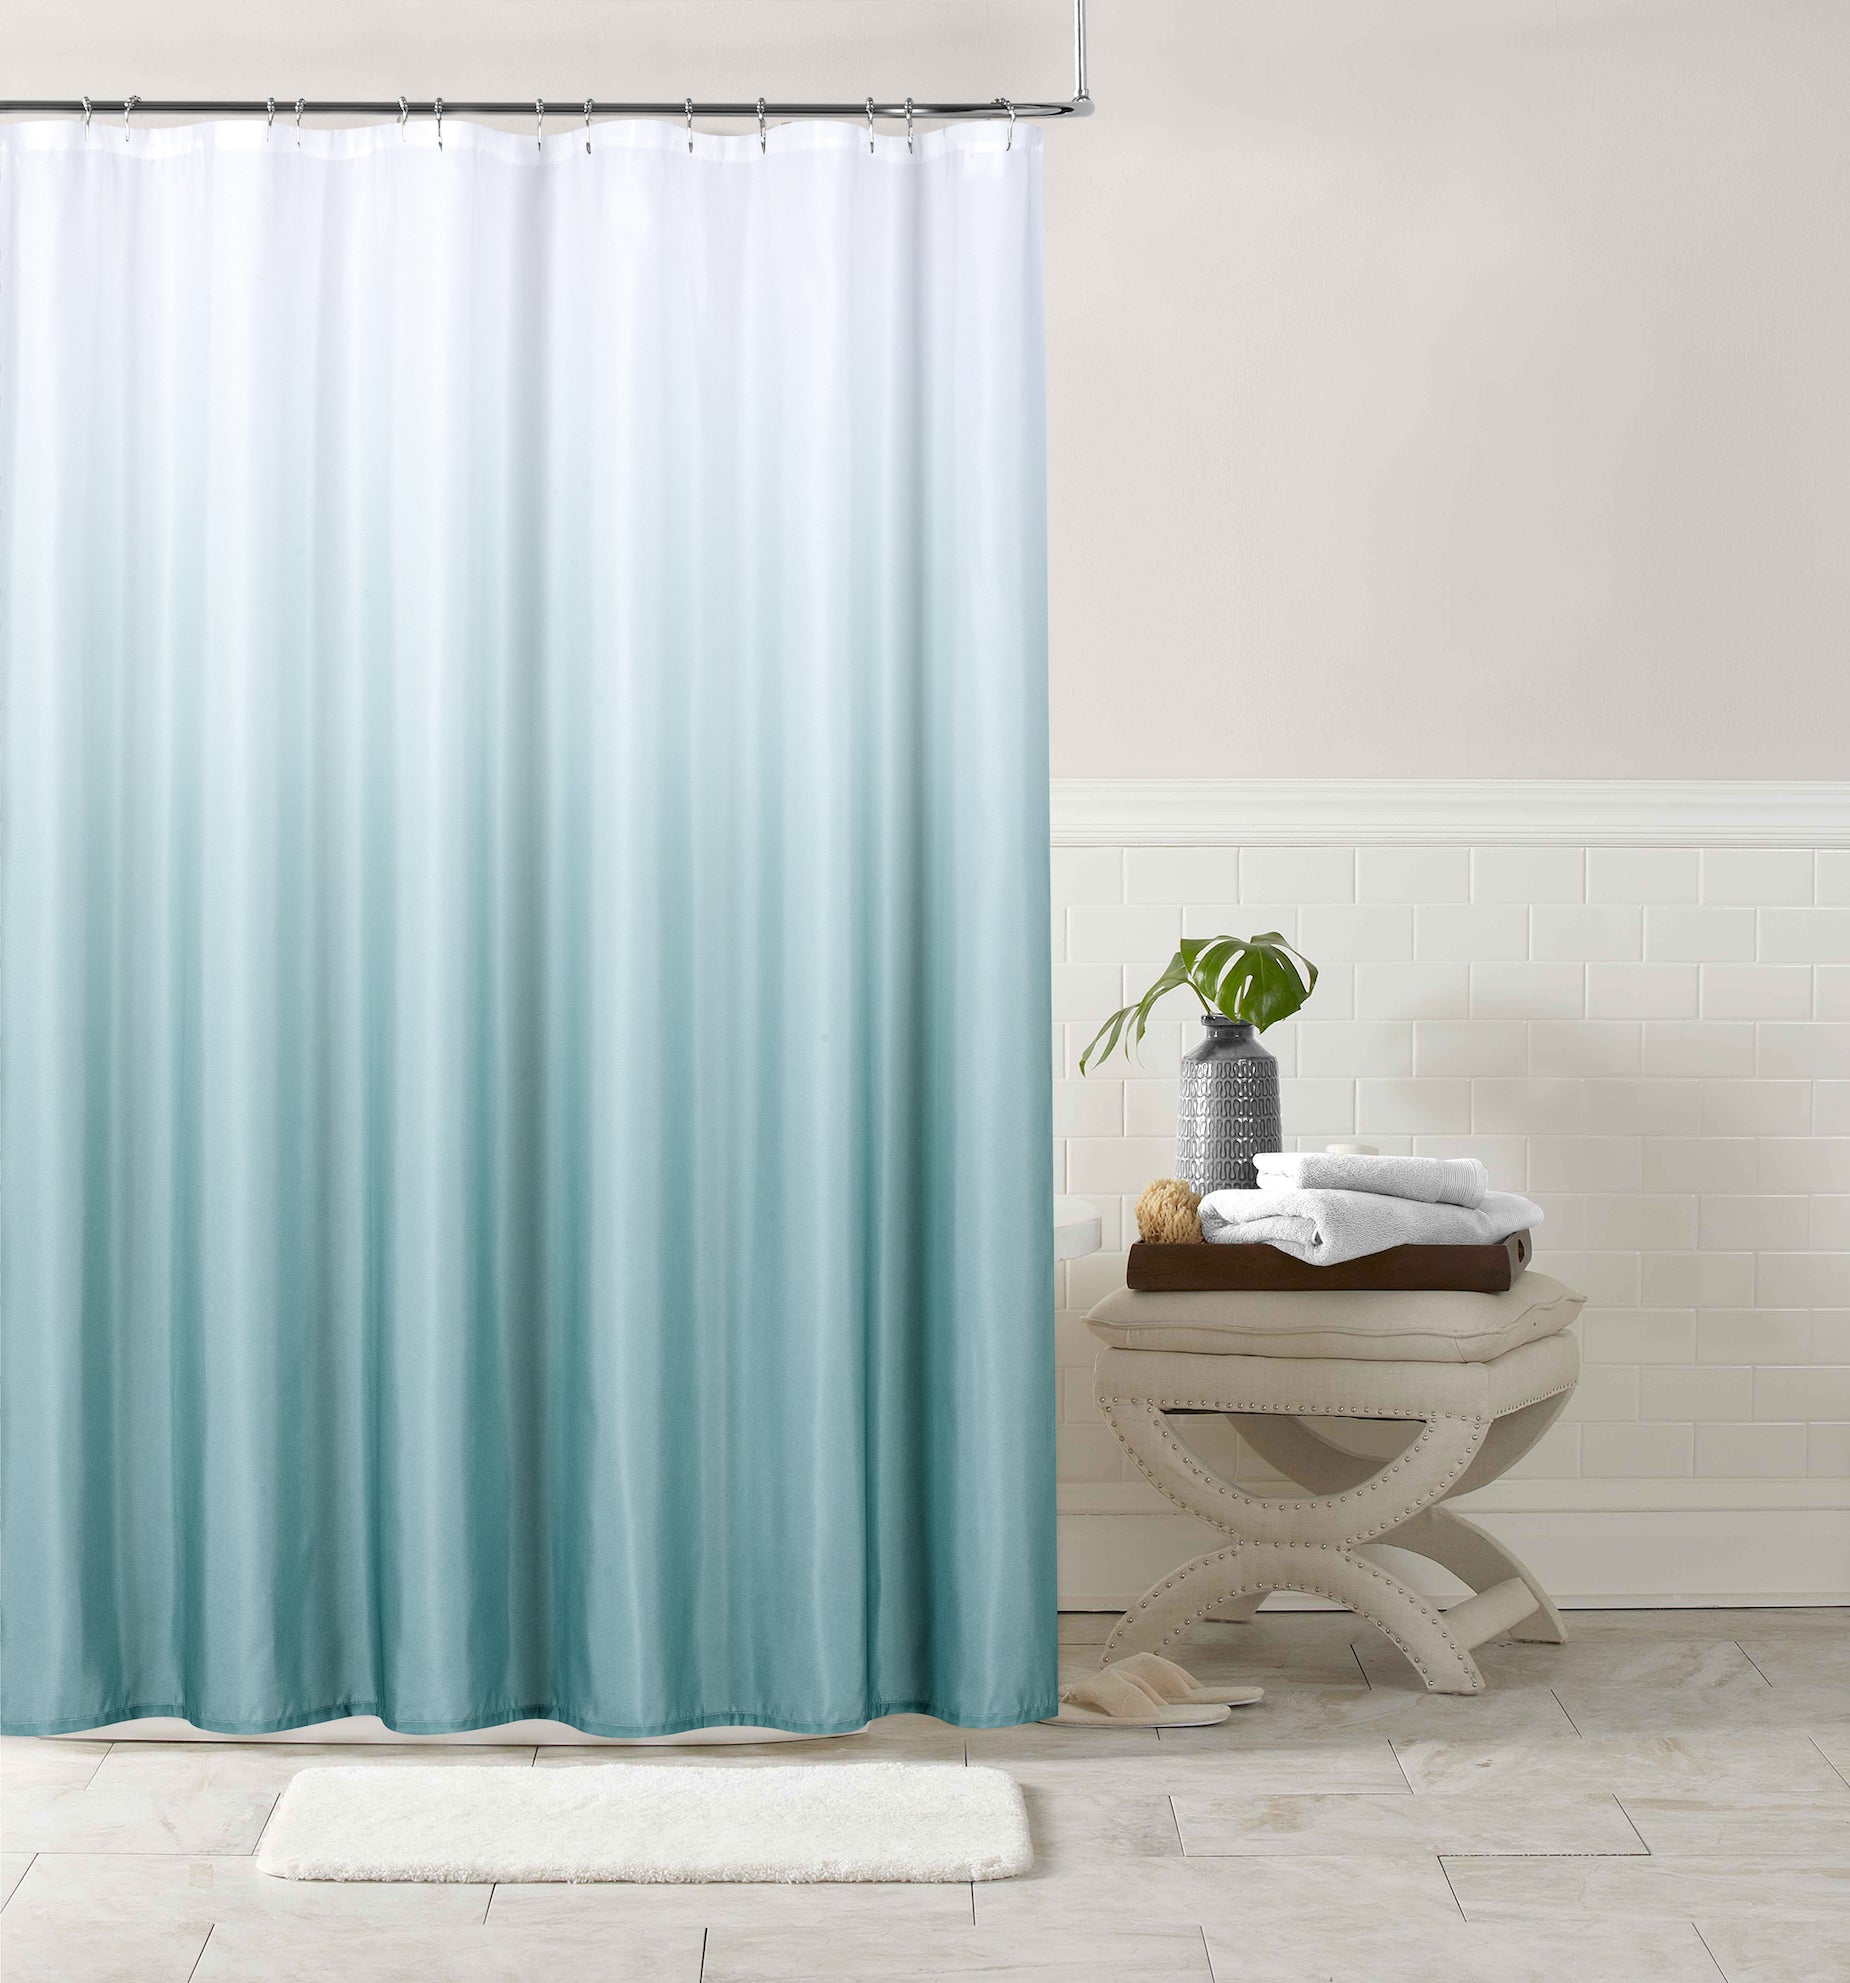 Dainty Home Shades Printed Fabric 3D Textured Gradient Colors Ombre Designed Fabric Shower Curtain 70" x 72"